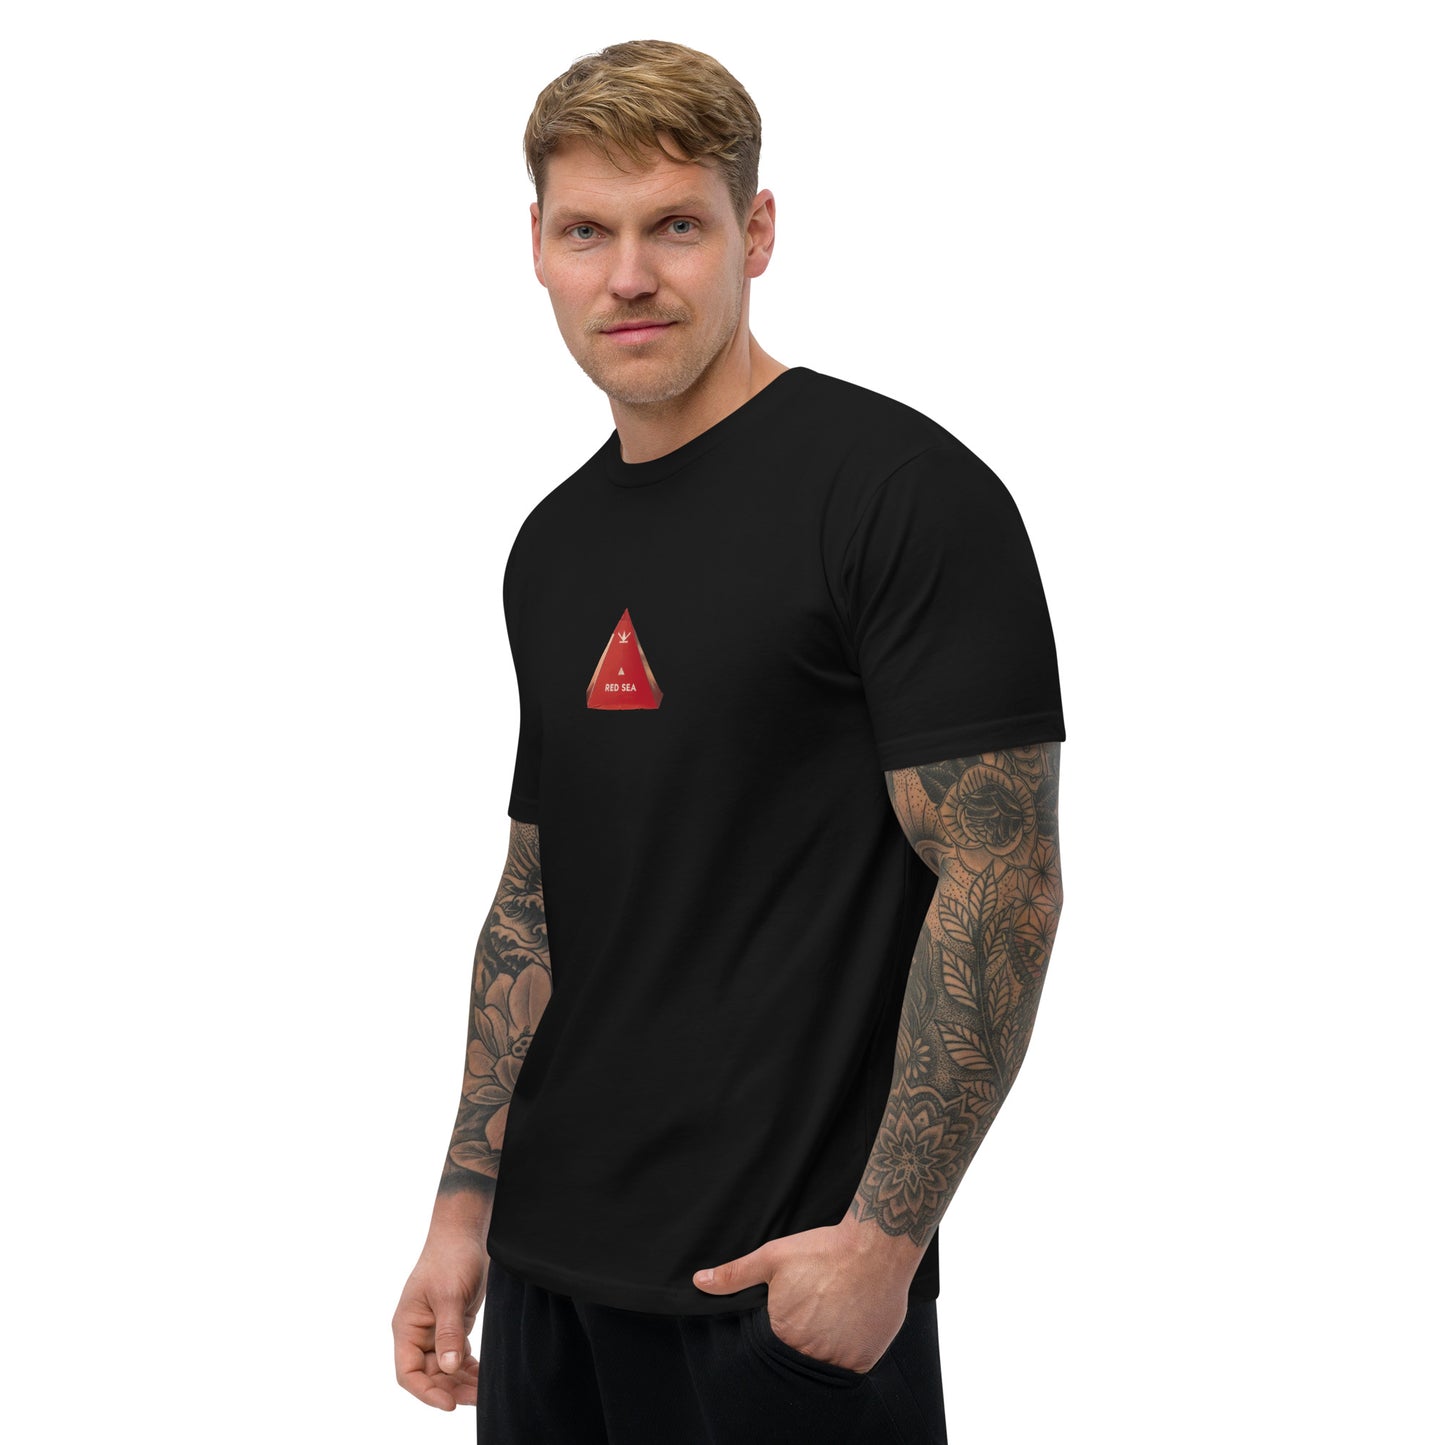 The Red Pyramid T